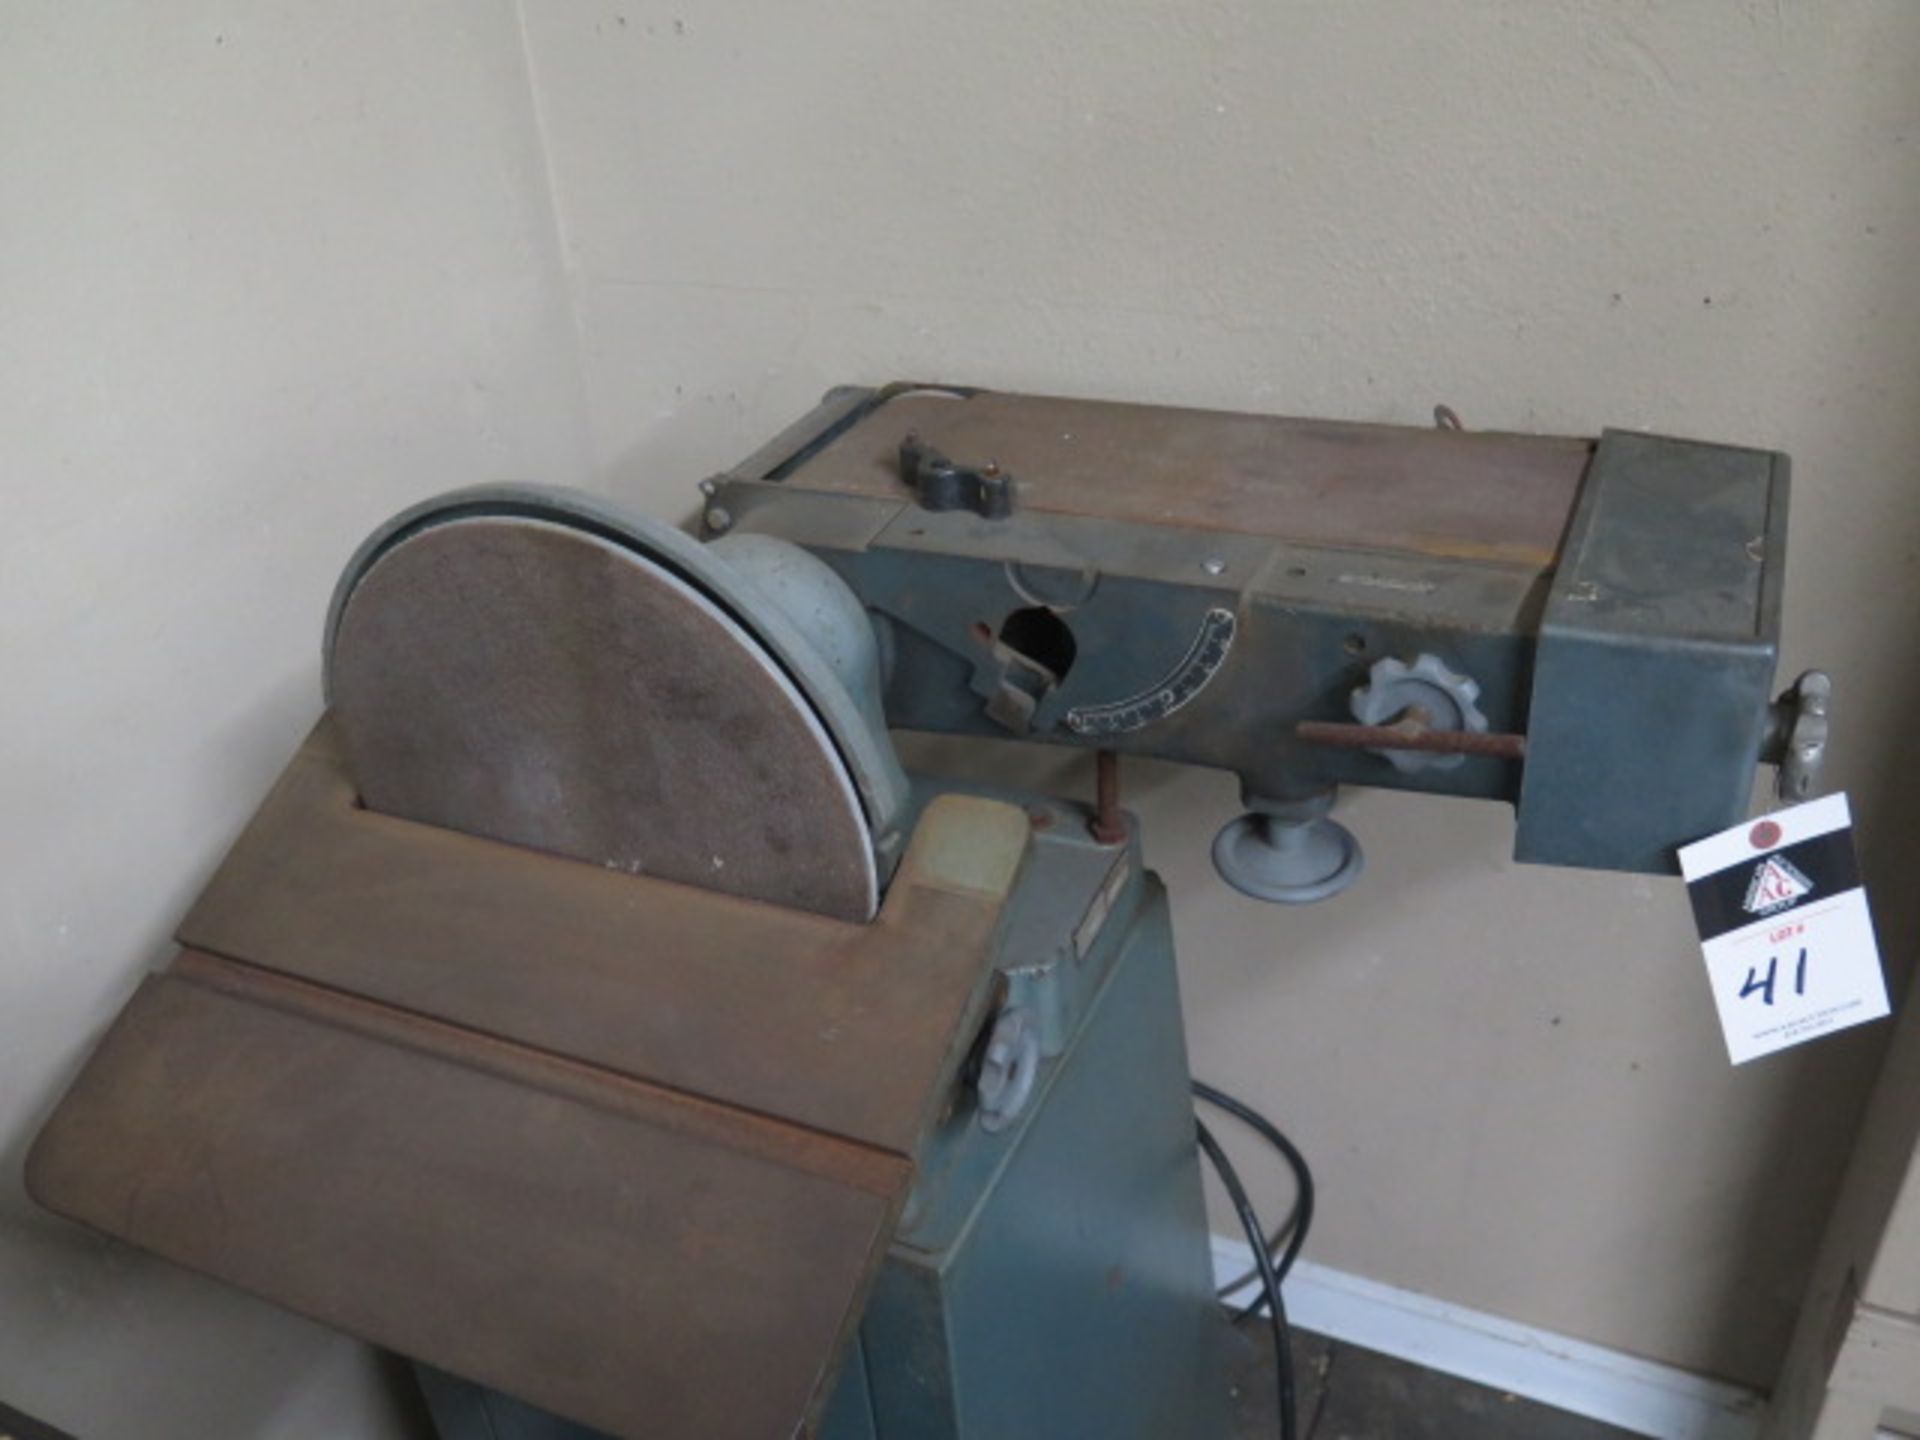 6” Belt / 12” Disc Sander w/ Stand (SOLD AS-IS - NO WARRANTY) - Image 2 of 6